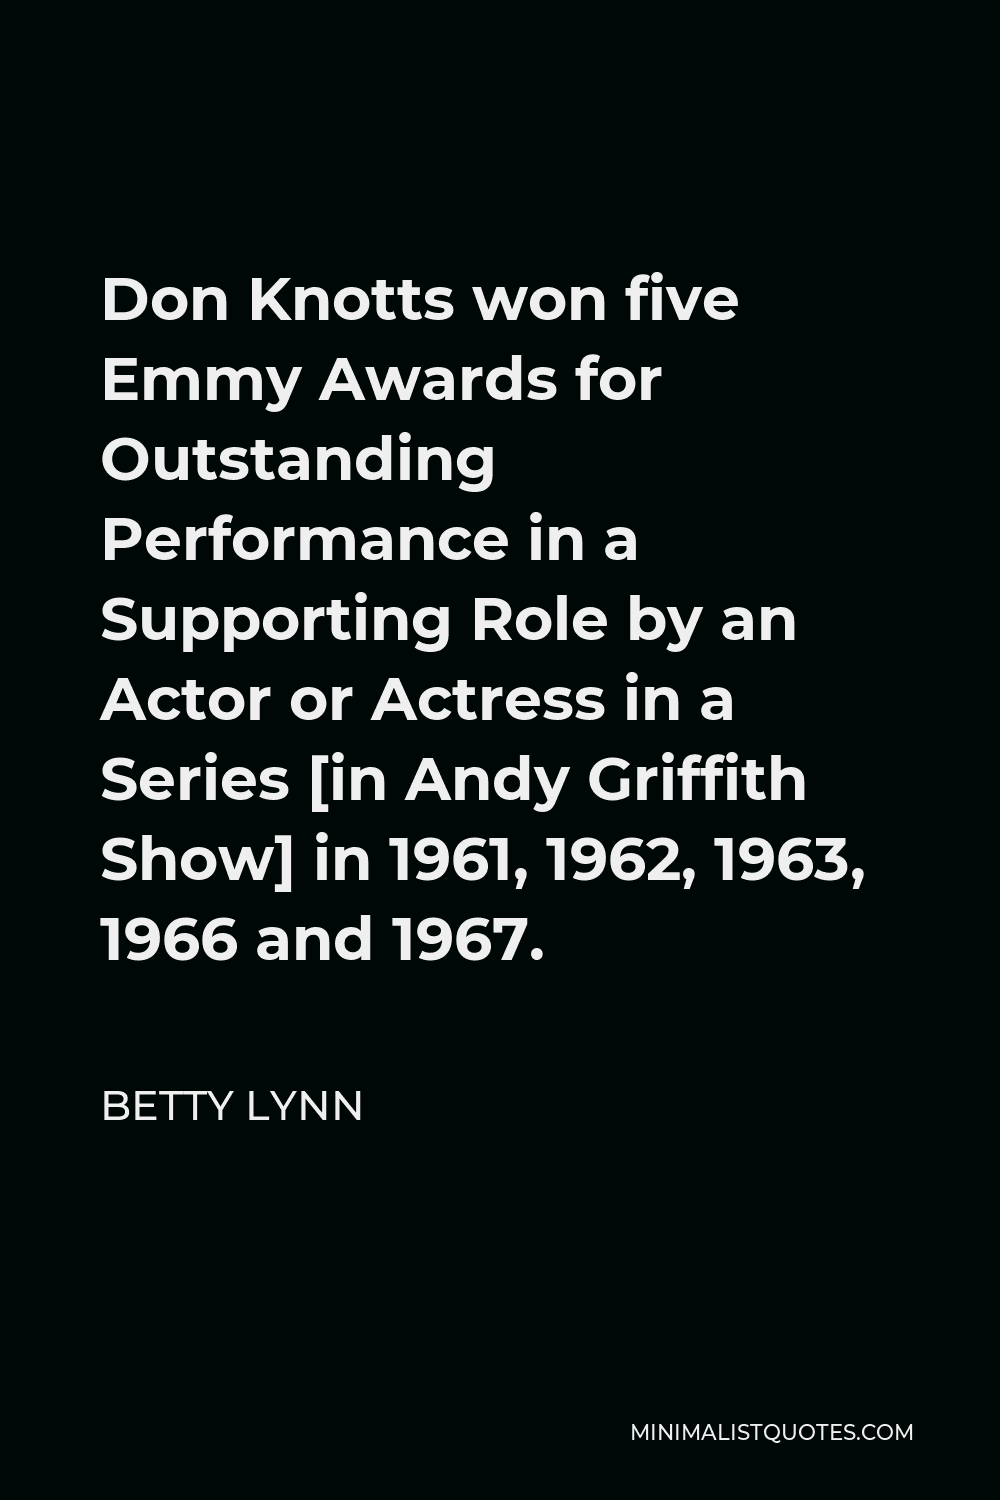 Betty Lynn Quote - Don Knotts won five Emmy Awards for Outstanding Performance in a Supporting Role by an Actor or Actress in a Series [in Andy Griffith Show] in 1961, 1962, 1963, 1966 and 1967.